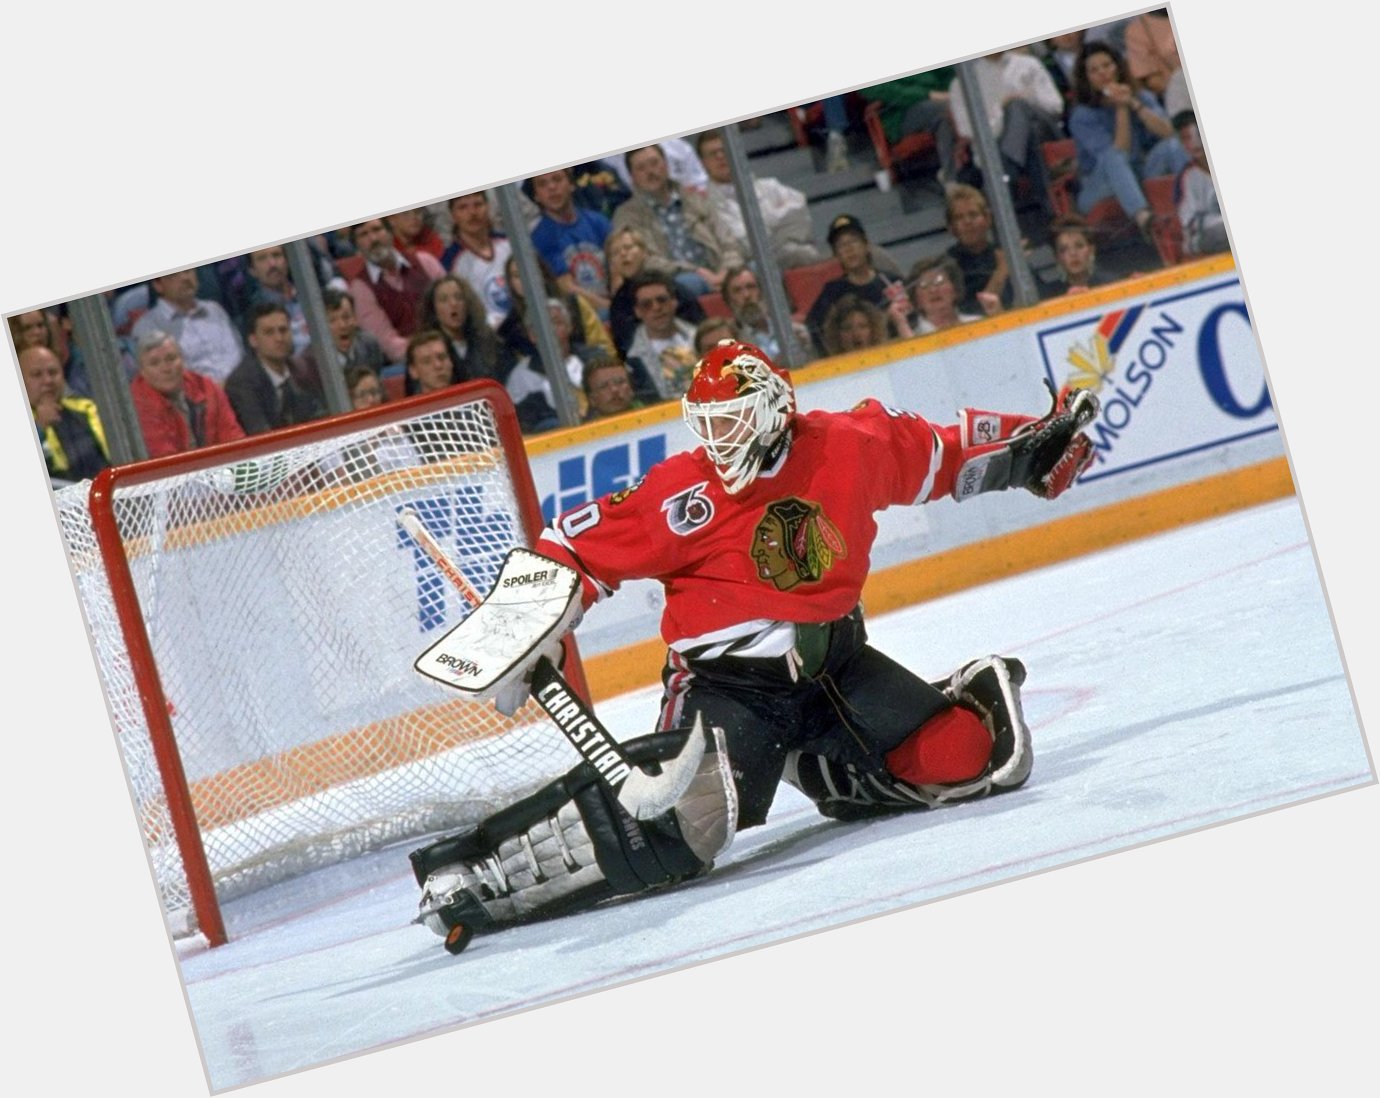 Happy Birthday to Ed Belfour, who turns 52 today! 